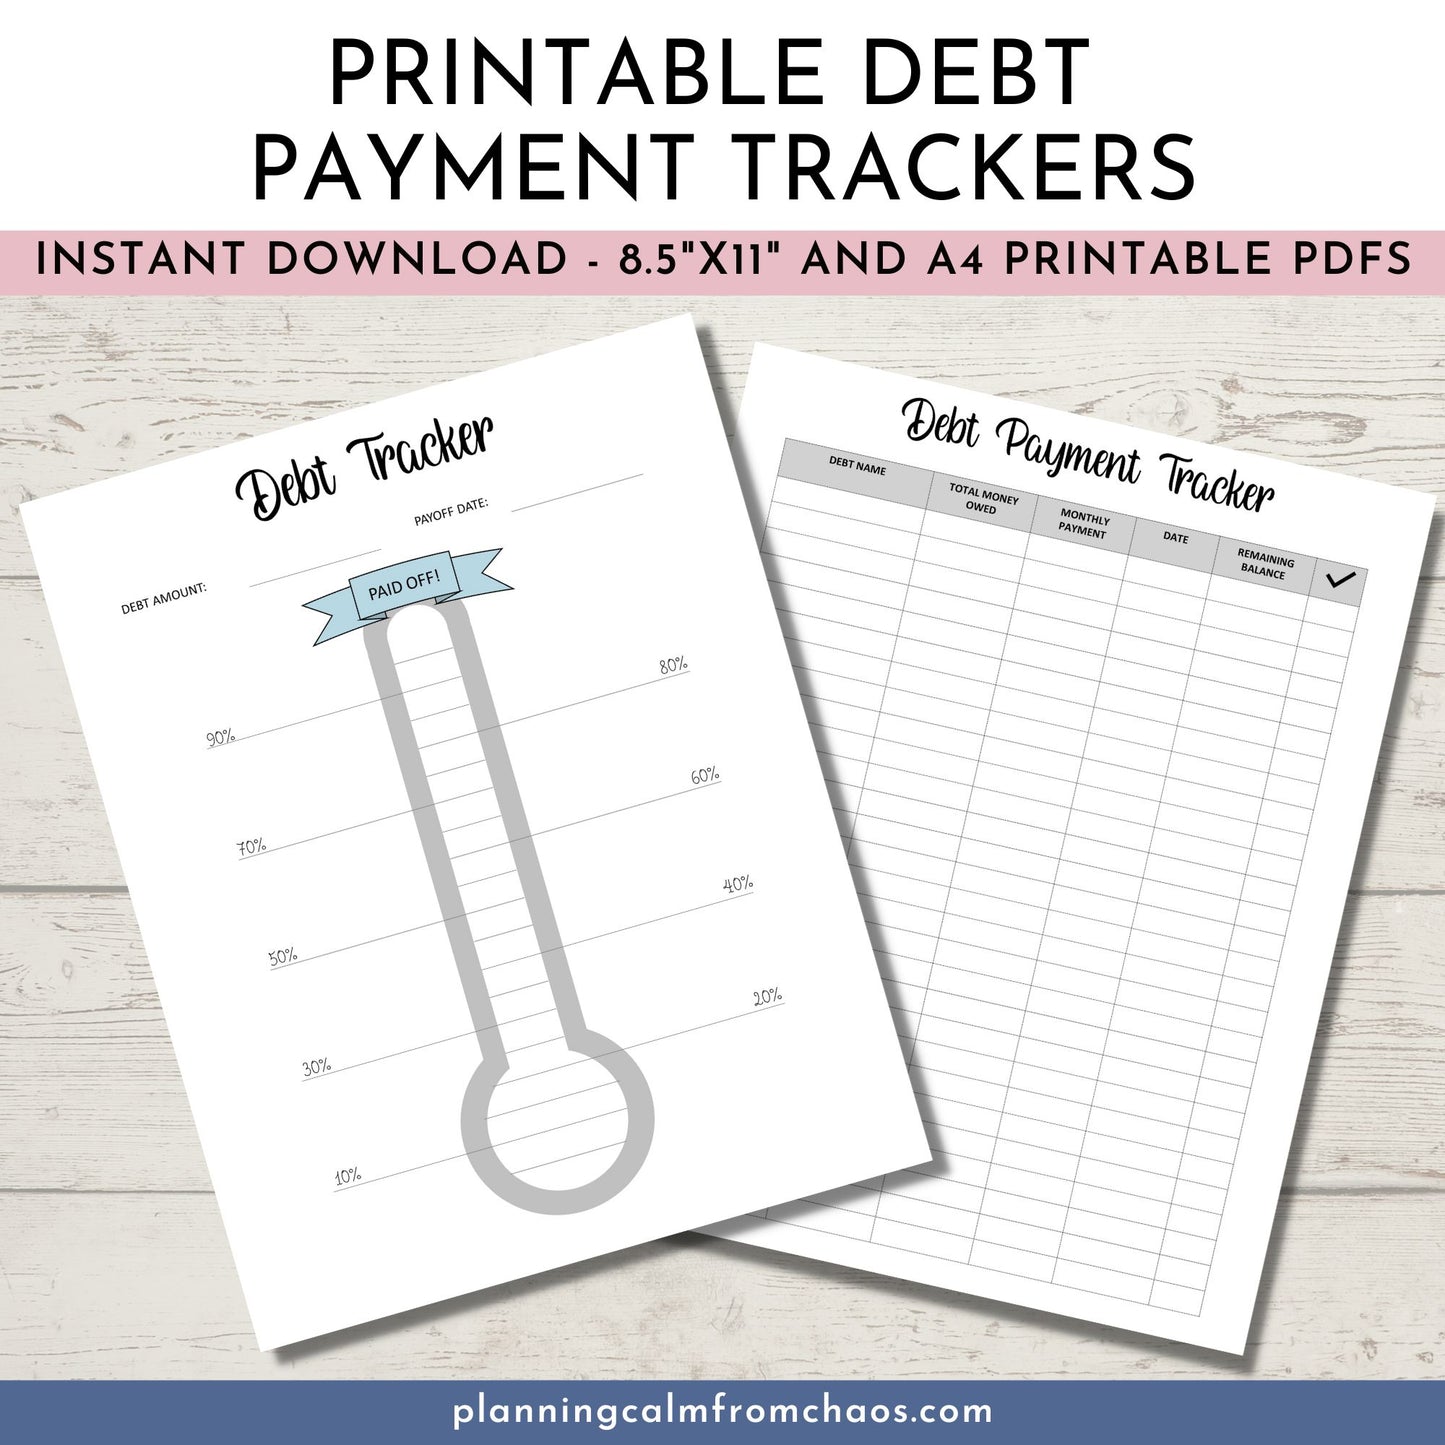 printable debt payment trackers